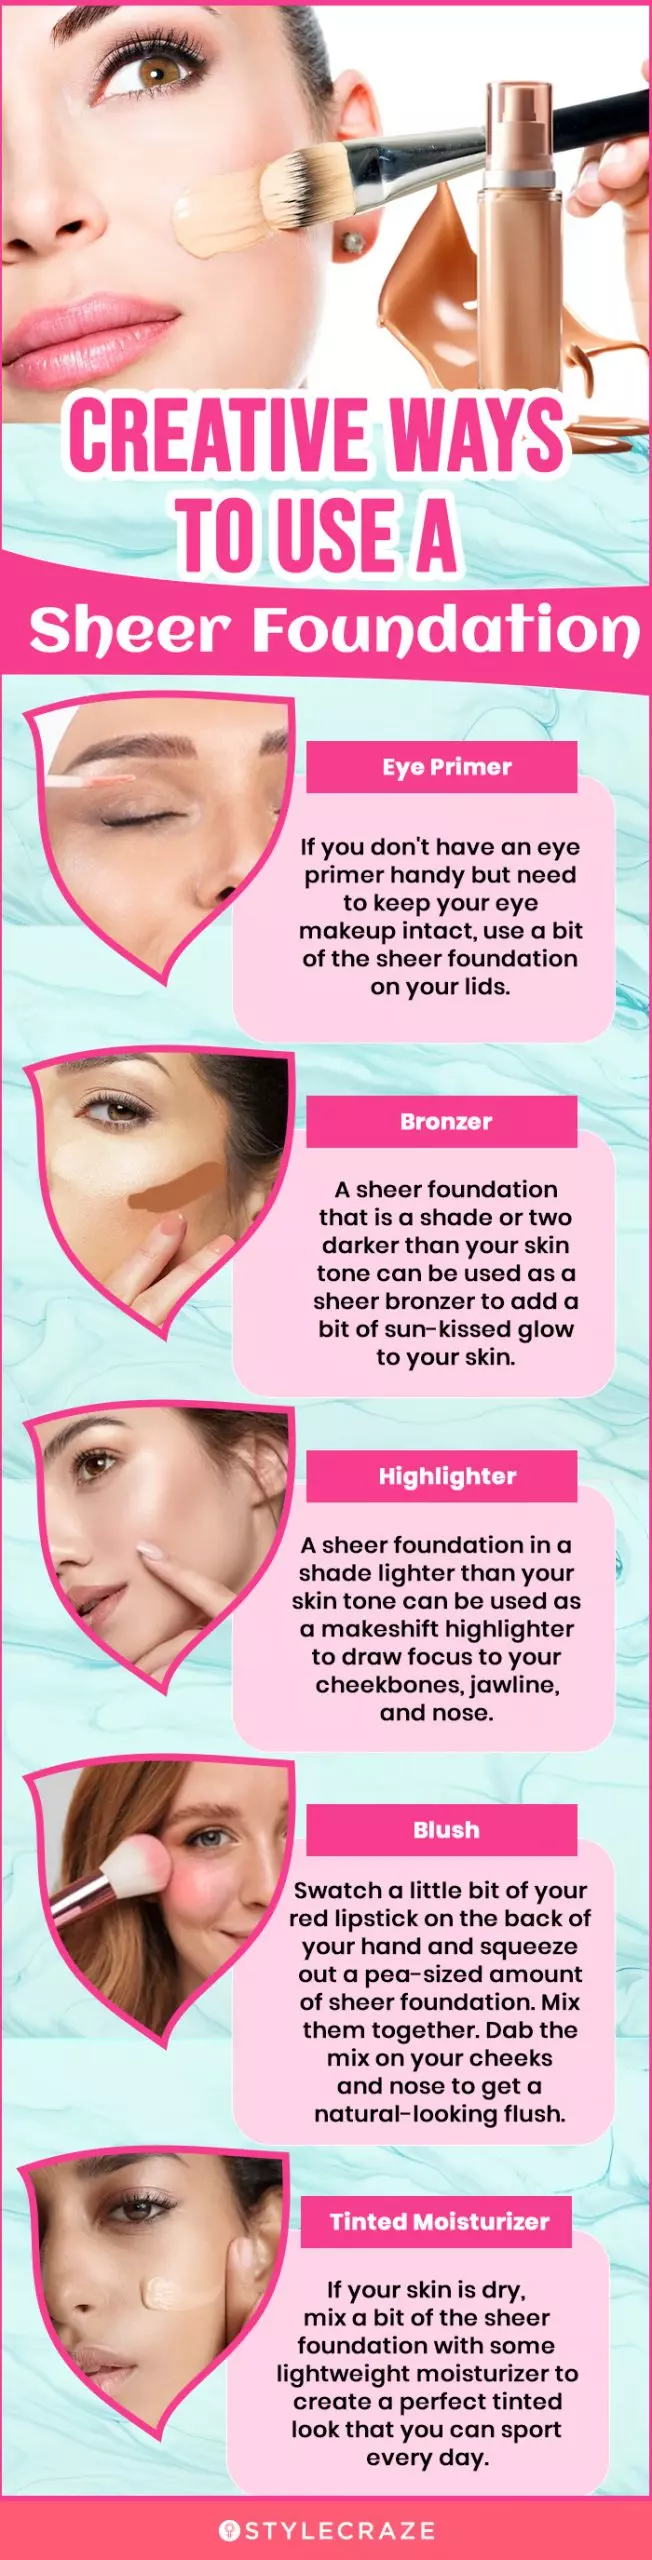 Creative Ways To Use A Sheer Foundation (infographic)